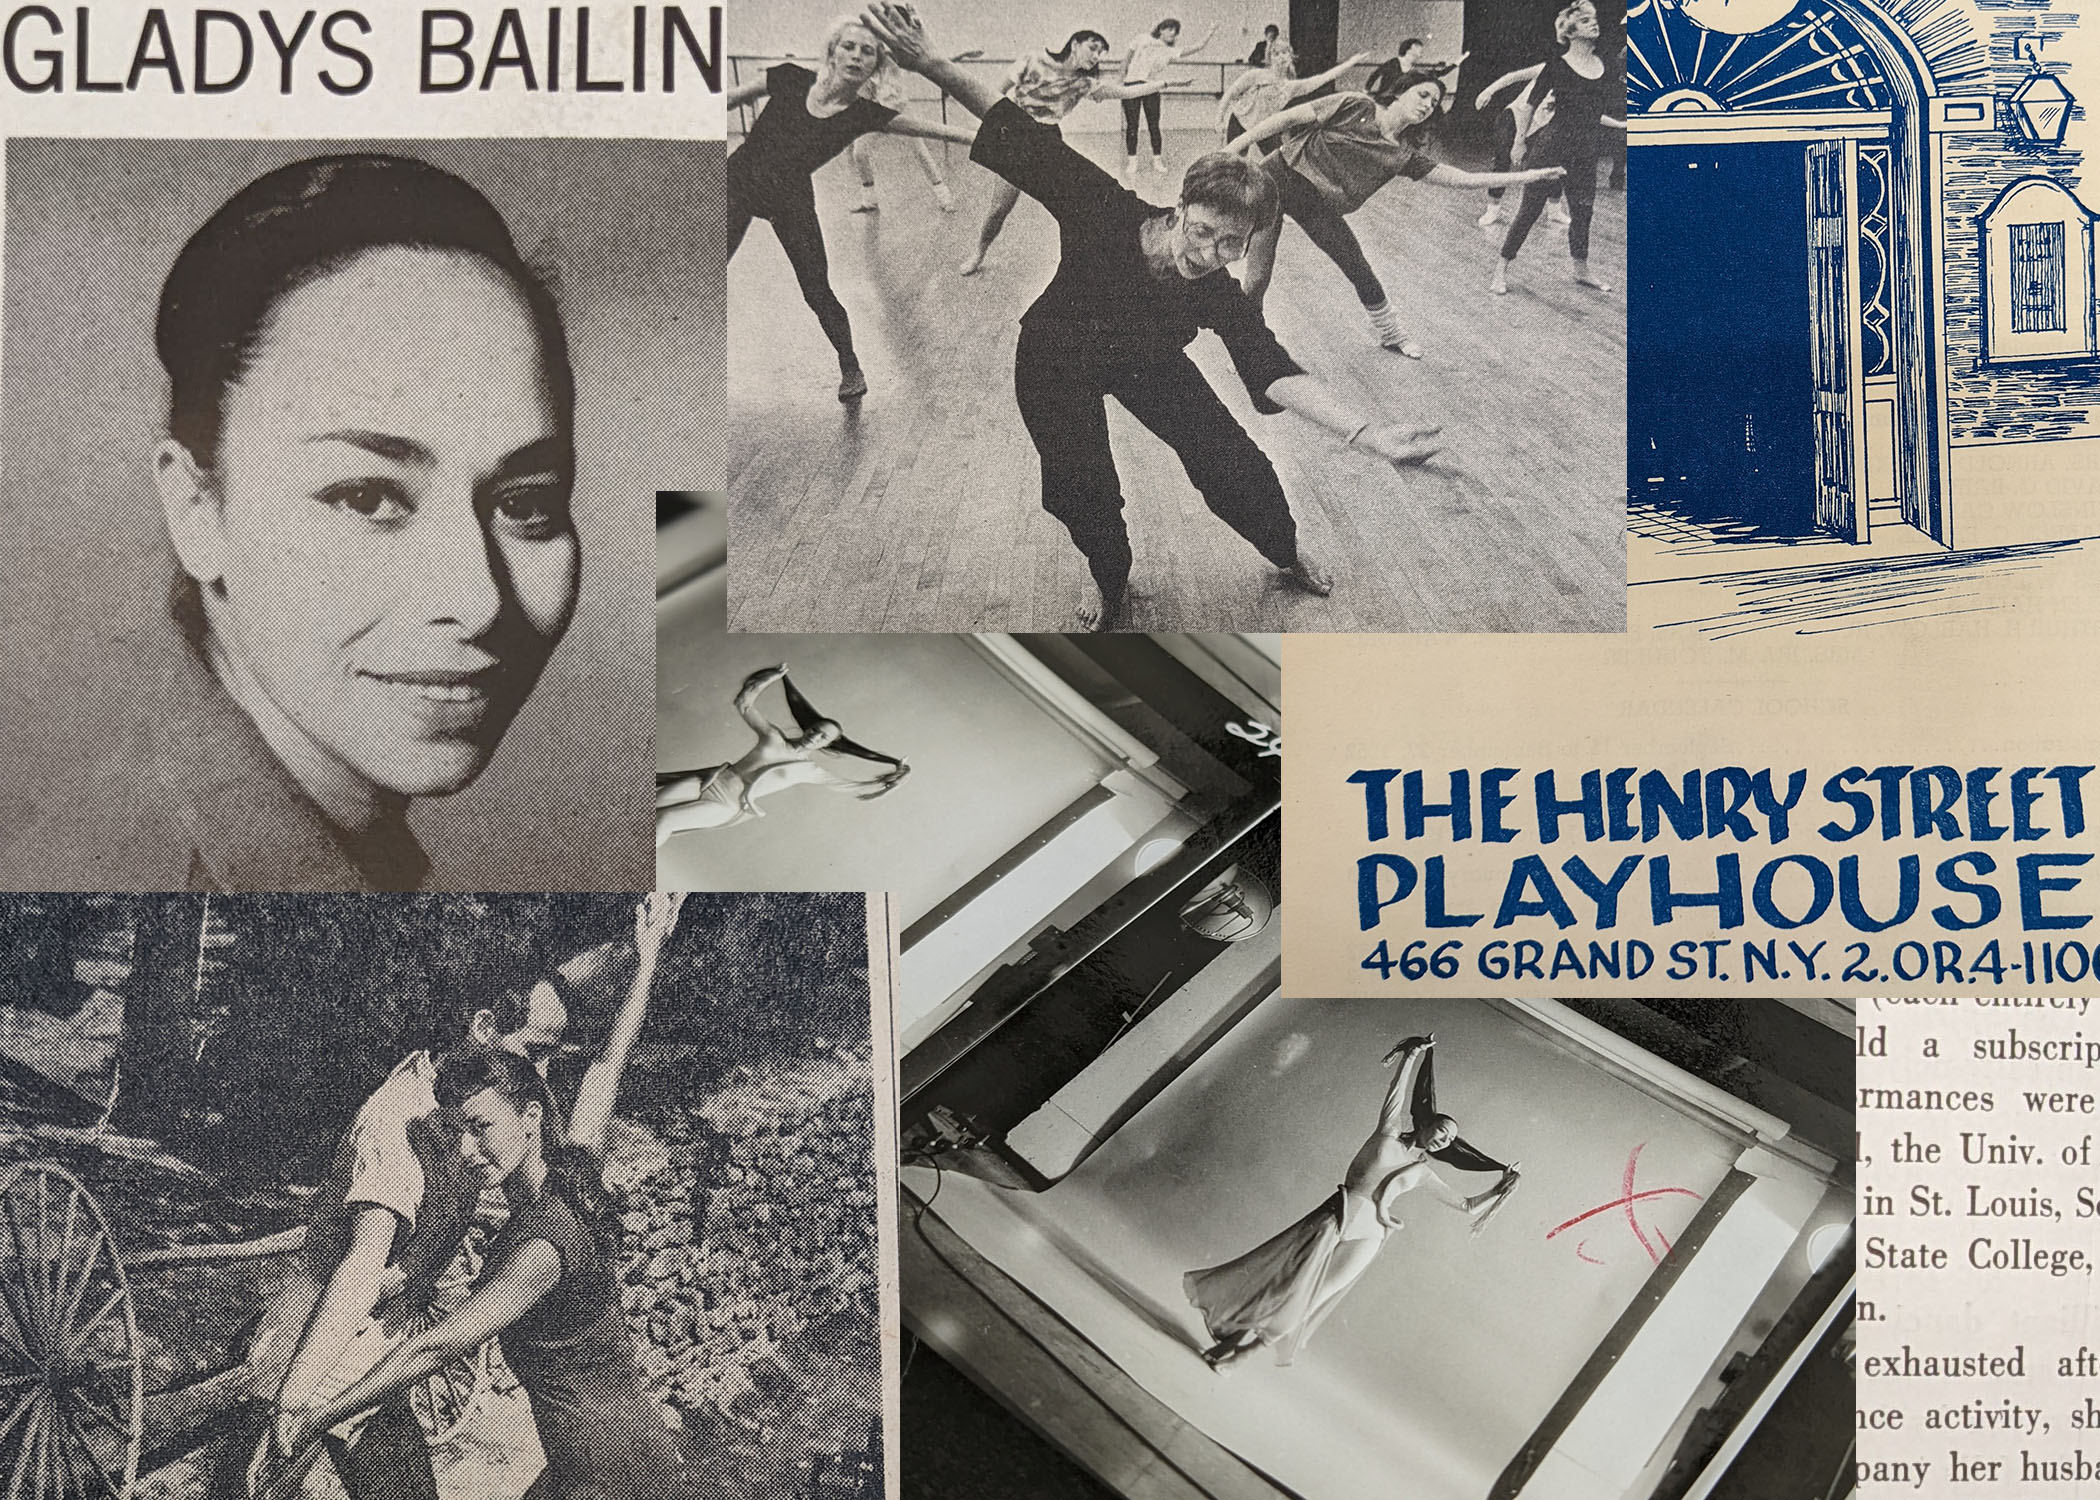 collage of news clippings of Gladys Bailin - portrait, leading a dance class, dancing with Murray Louis, and a program from the Henry Street Playhouse, and images from a professional photography shoot featuring Bailin in a dance pose.